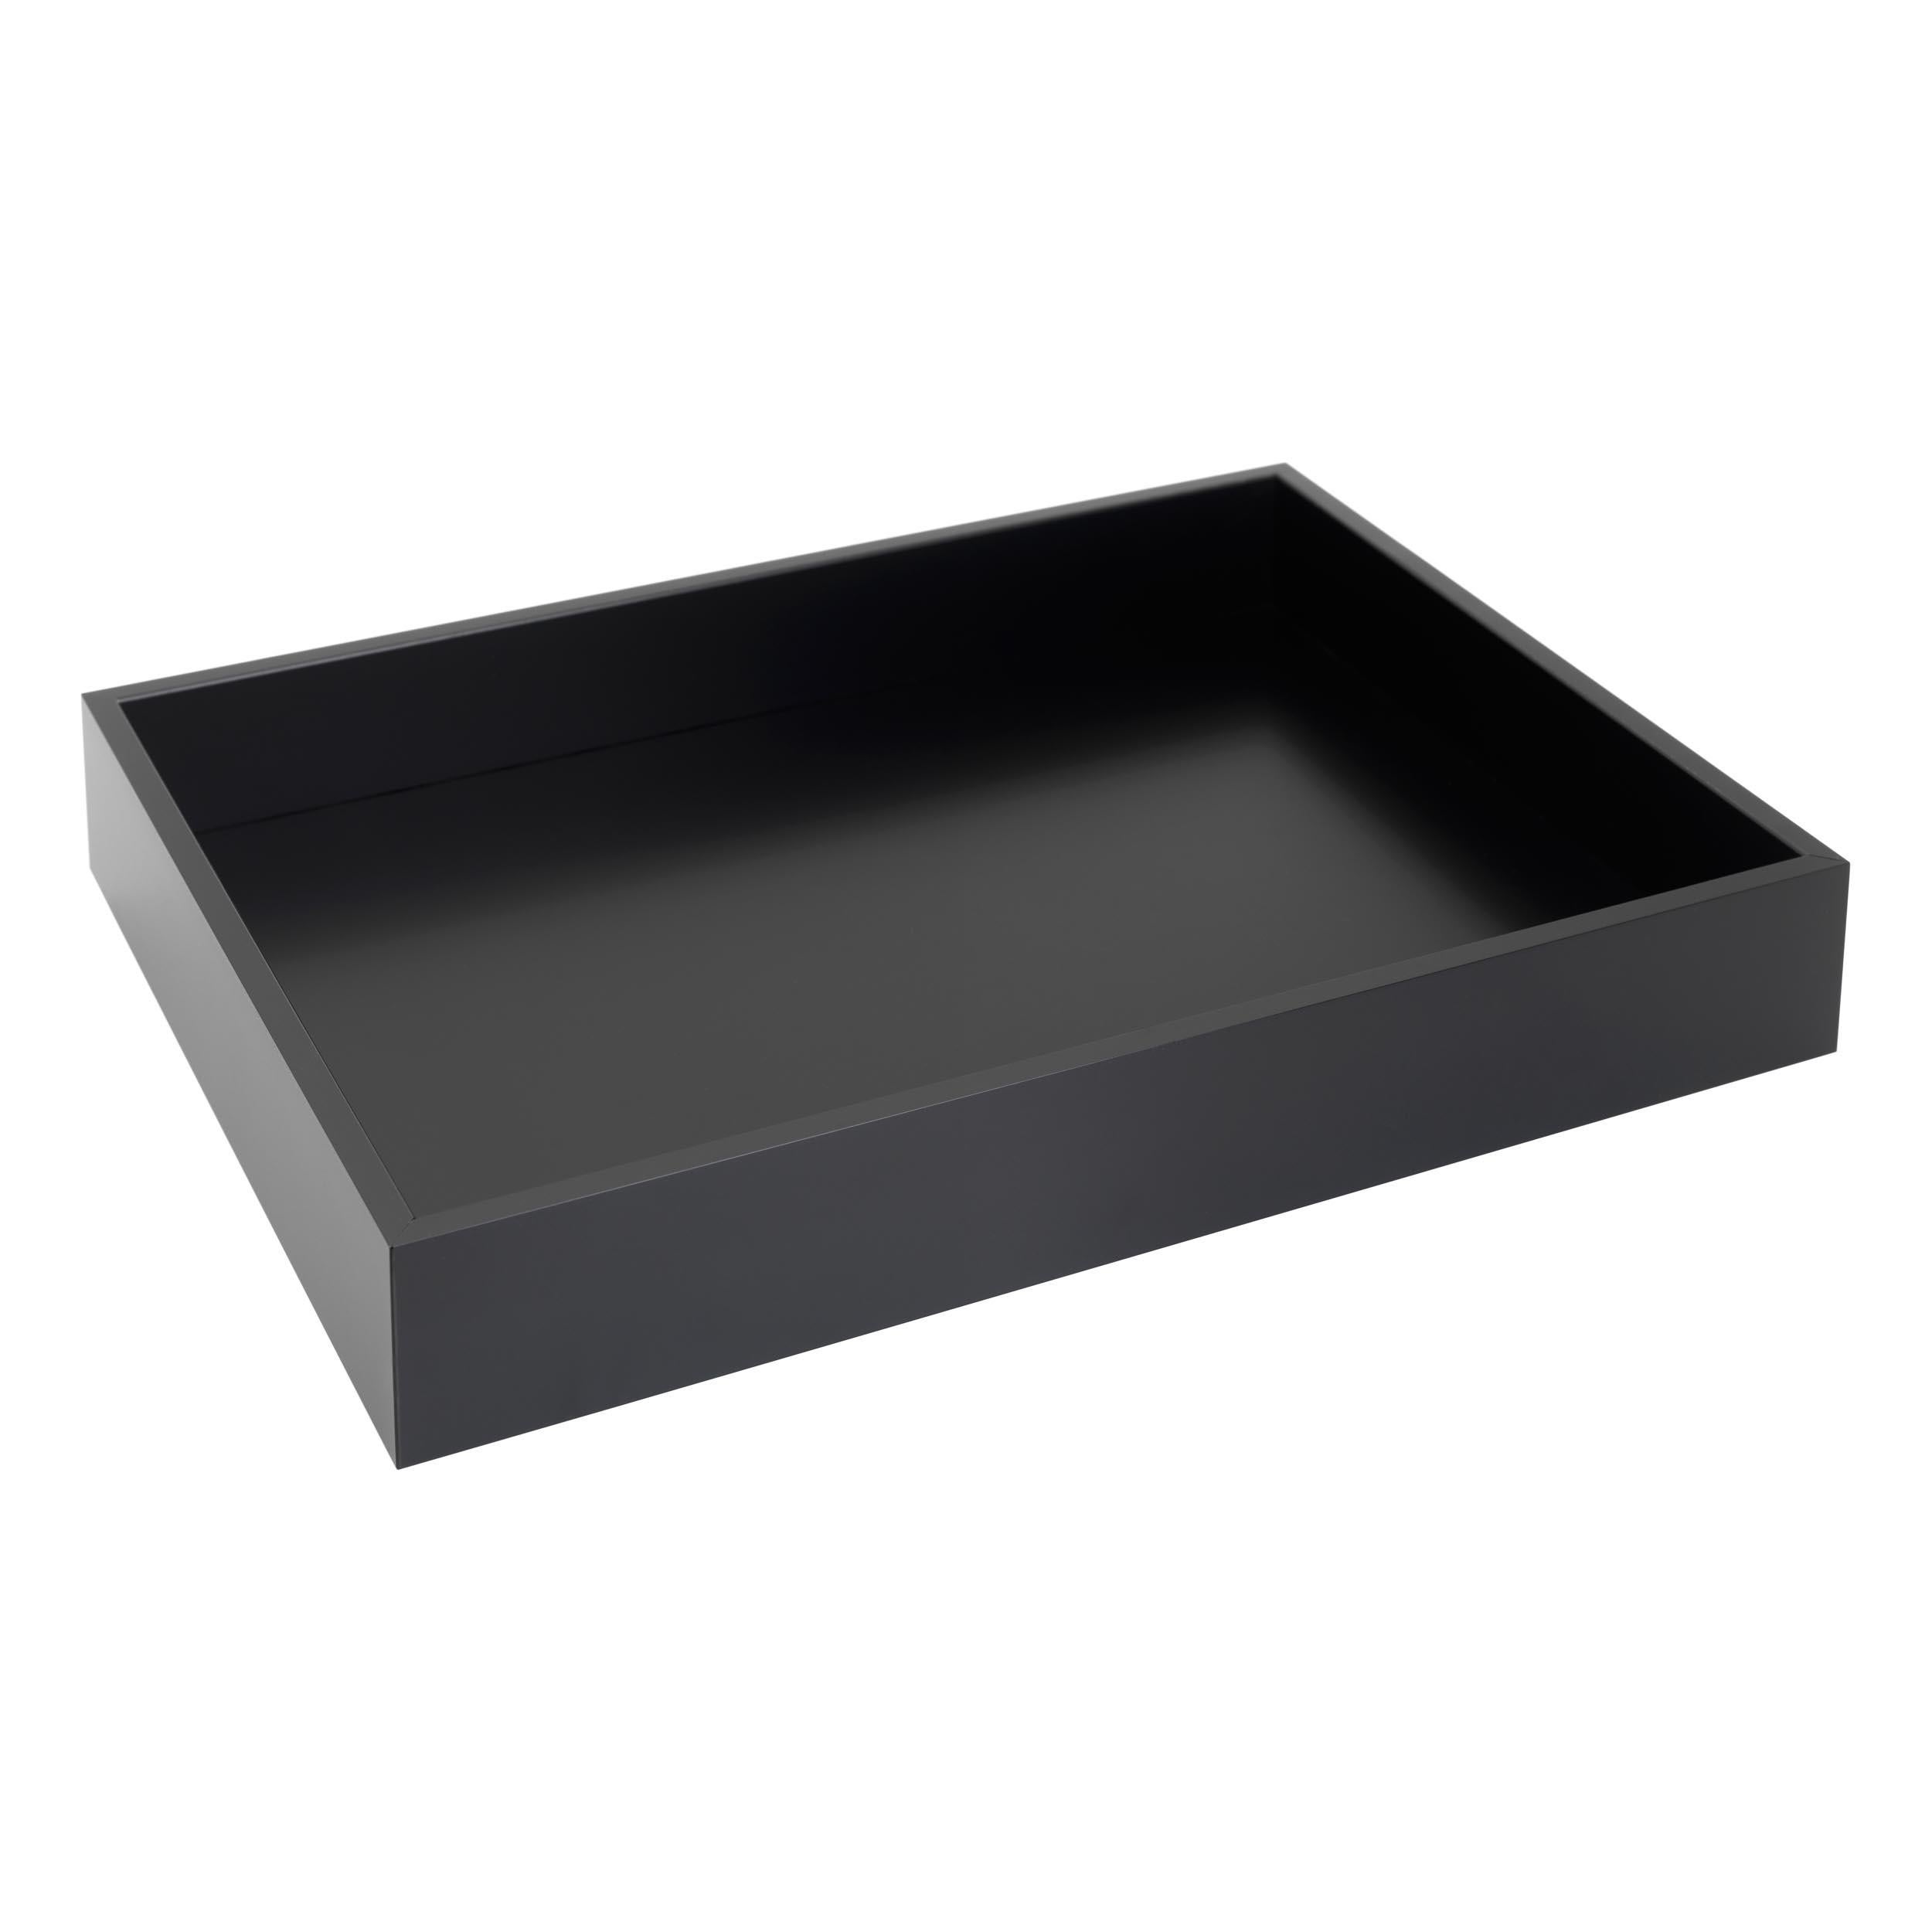 New Schonbuch Black Accessories Tally Tray in STOCK 